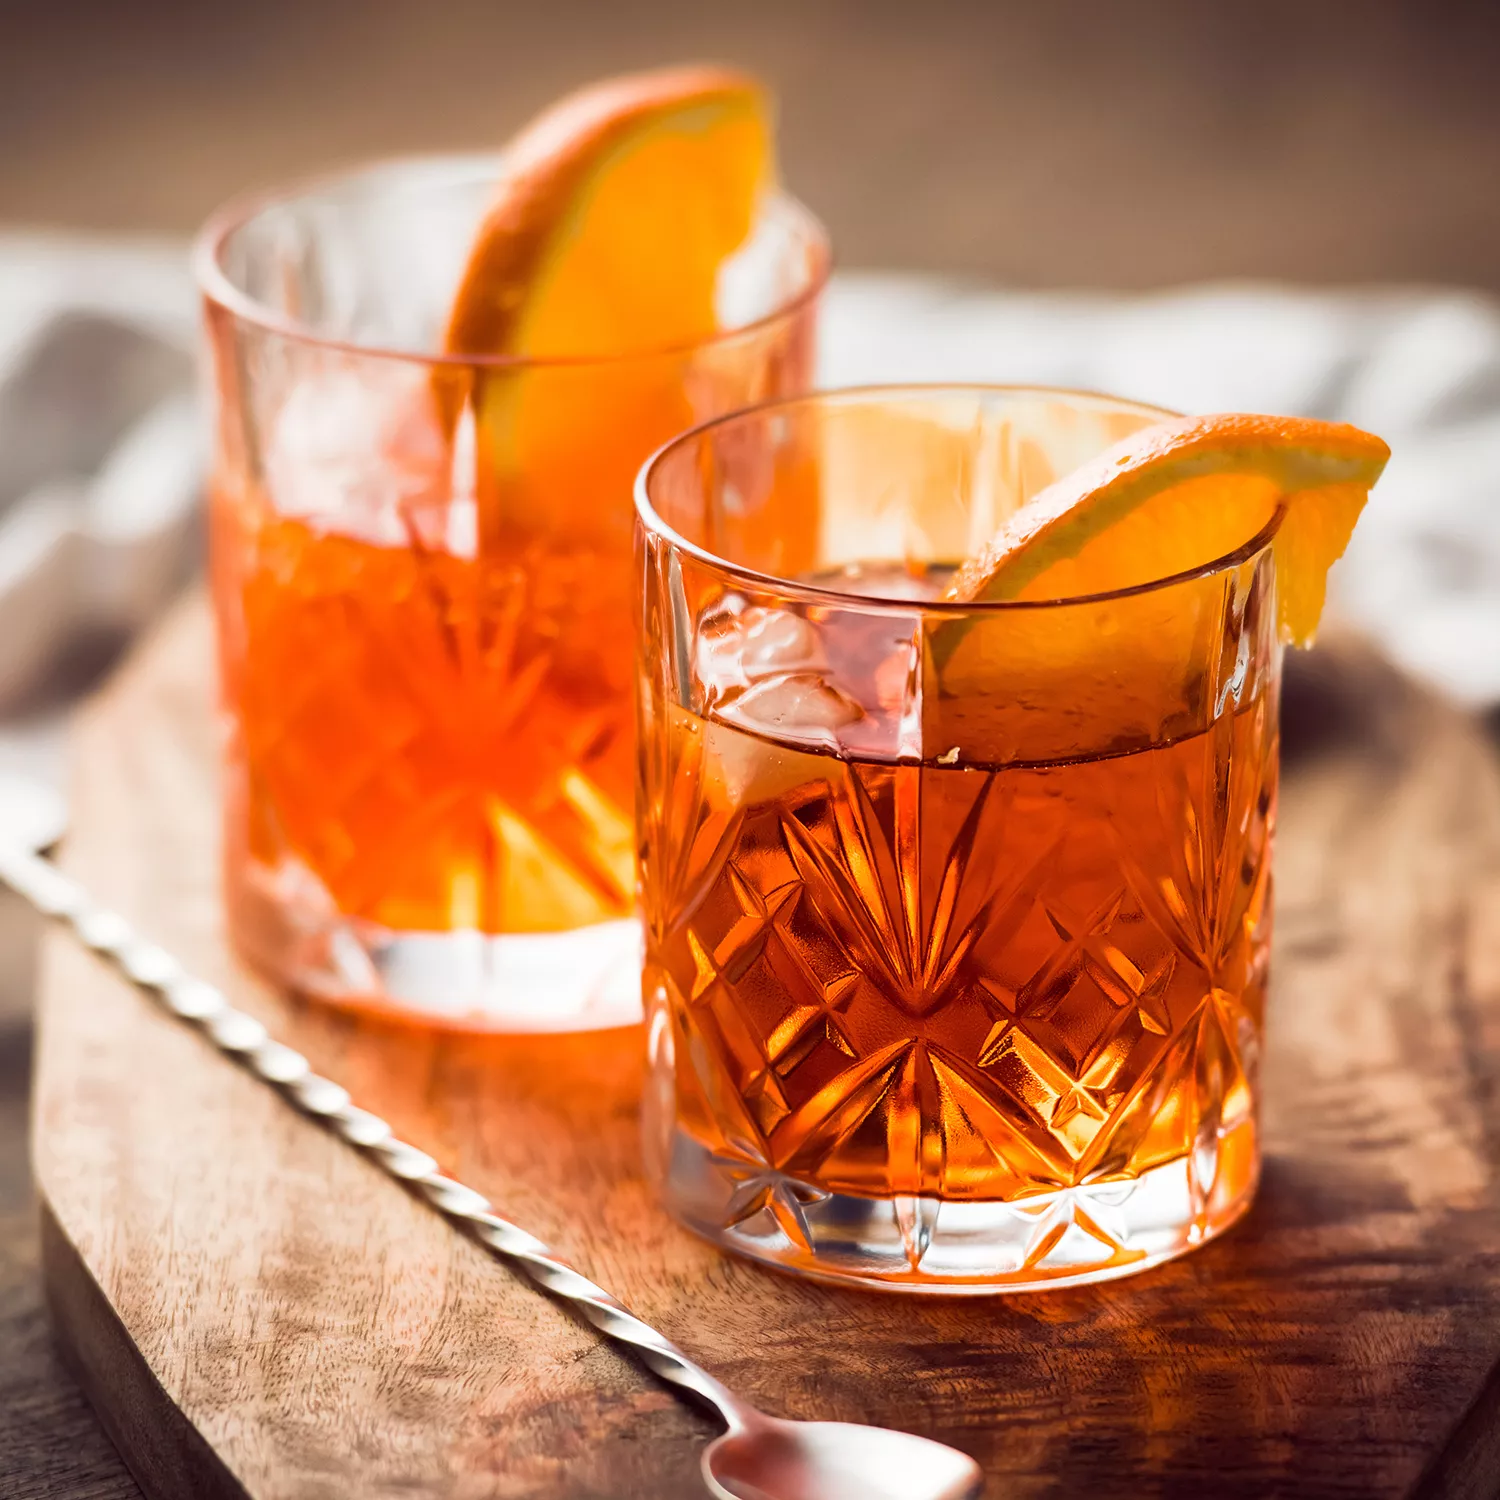 Online Focus Series Mixology: Classic Old Fashioned (ET)